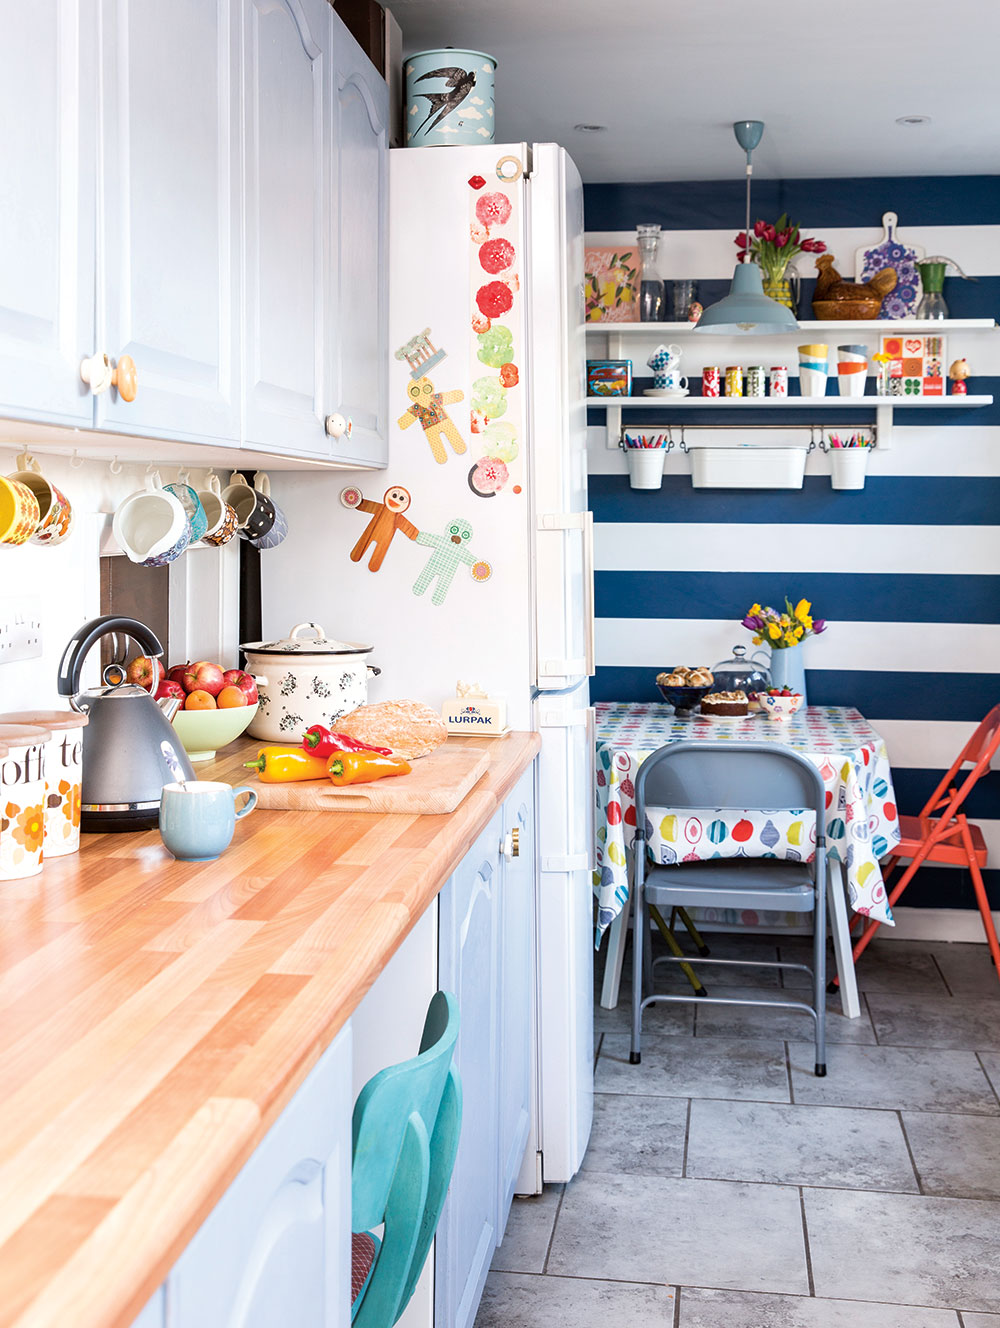 Our Kitchen by Lizzie Orme for Your Home